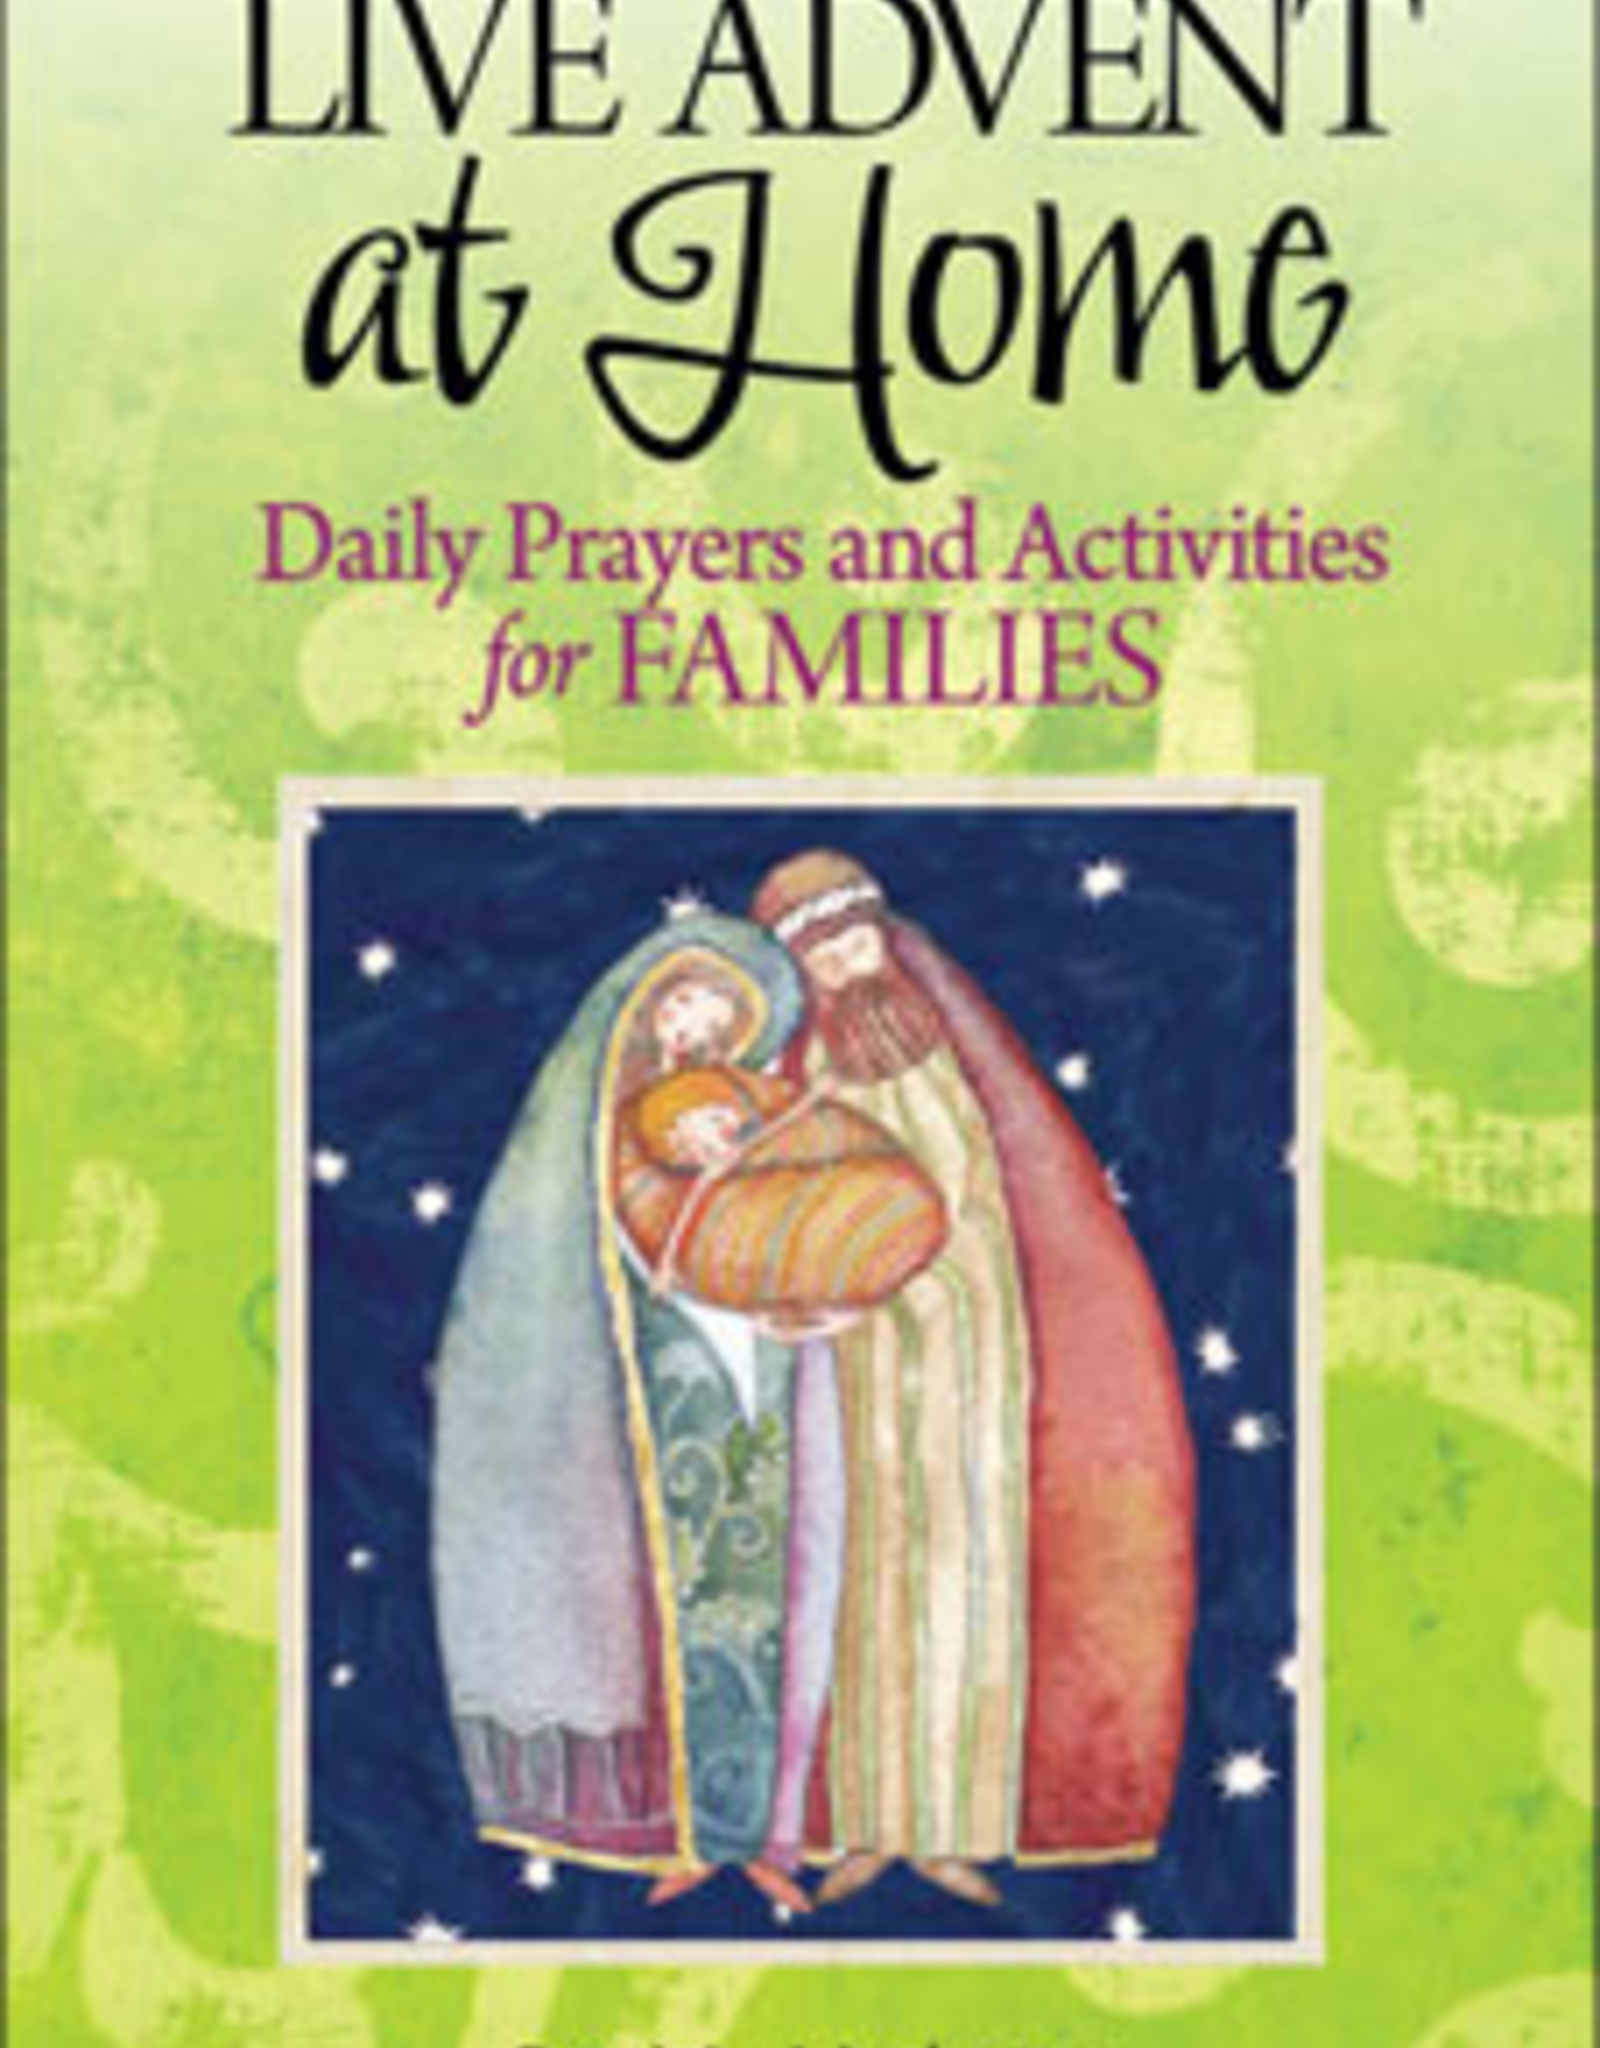 Liguori Press Live Advent at Home: Daily Prayers and Activities for Families, by Patricia Mathson (paperback)